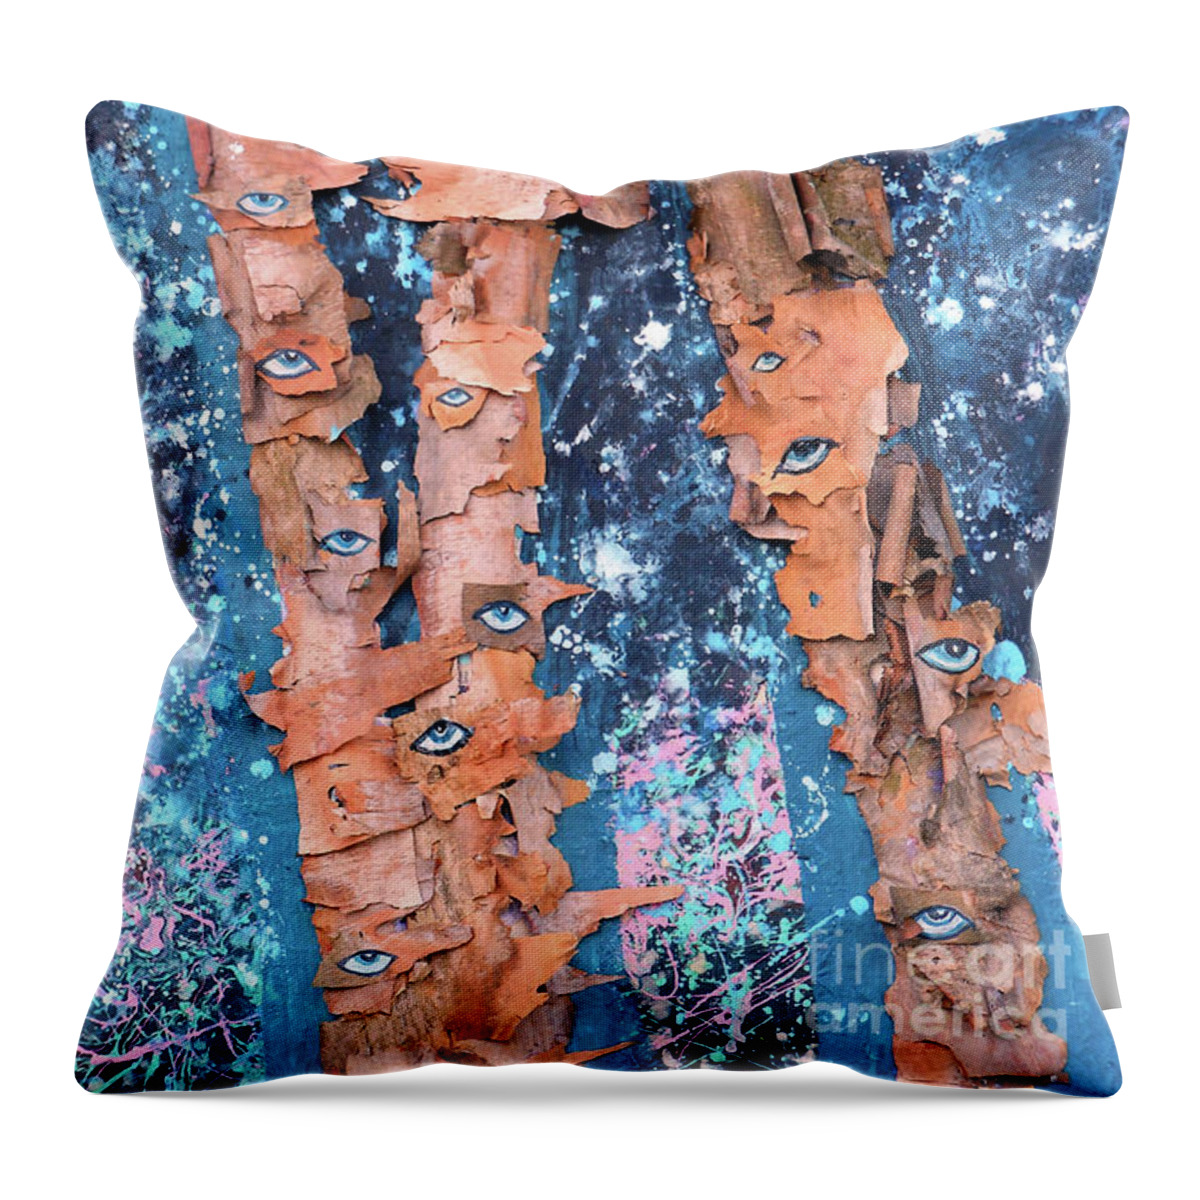 Birch Trees Throw Pillow featuring the mixed media Birch Trees With Eyes by Genevieve Esson